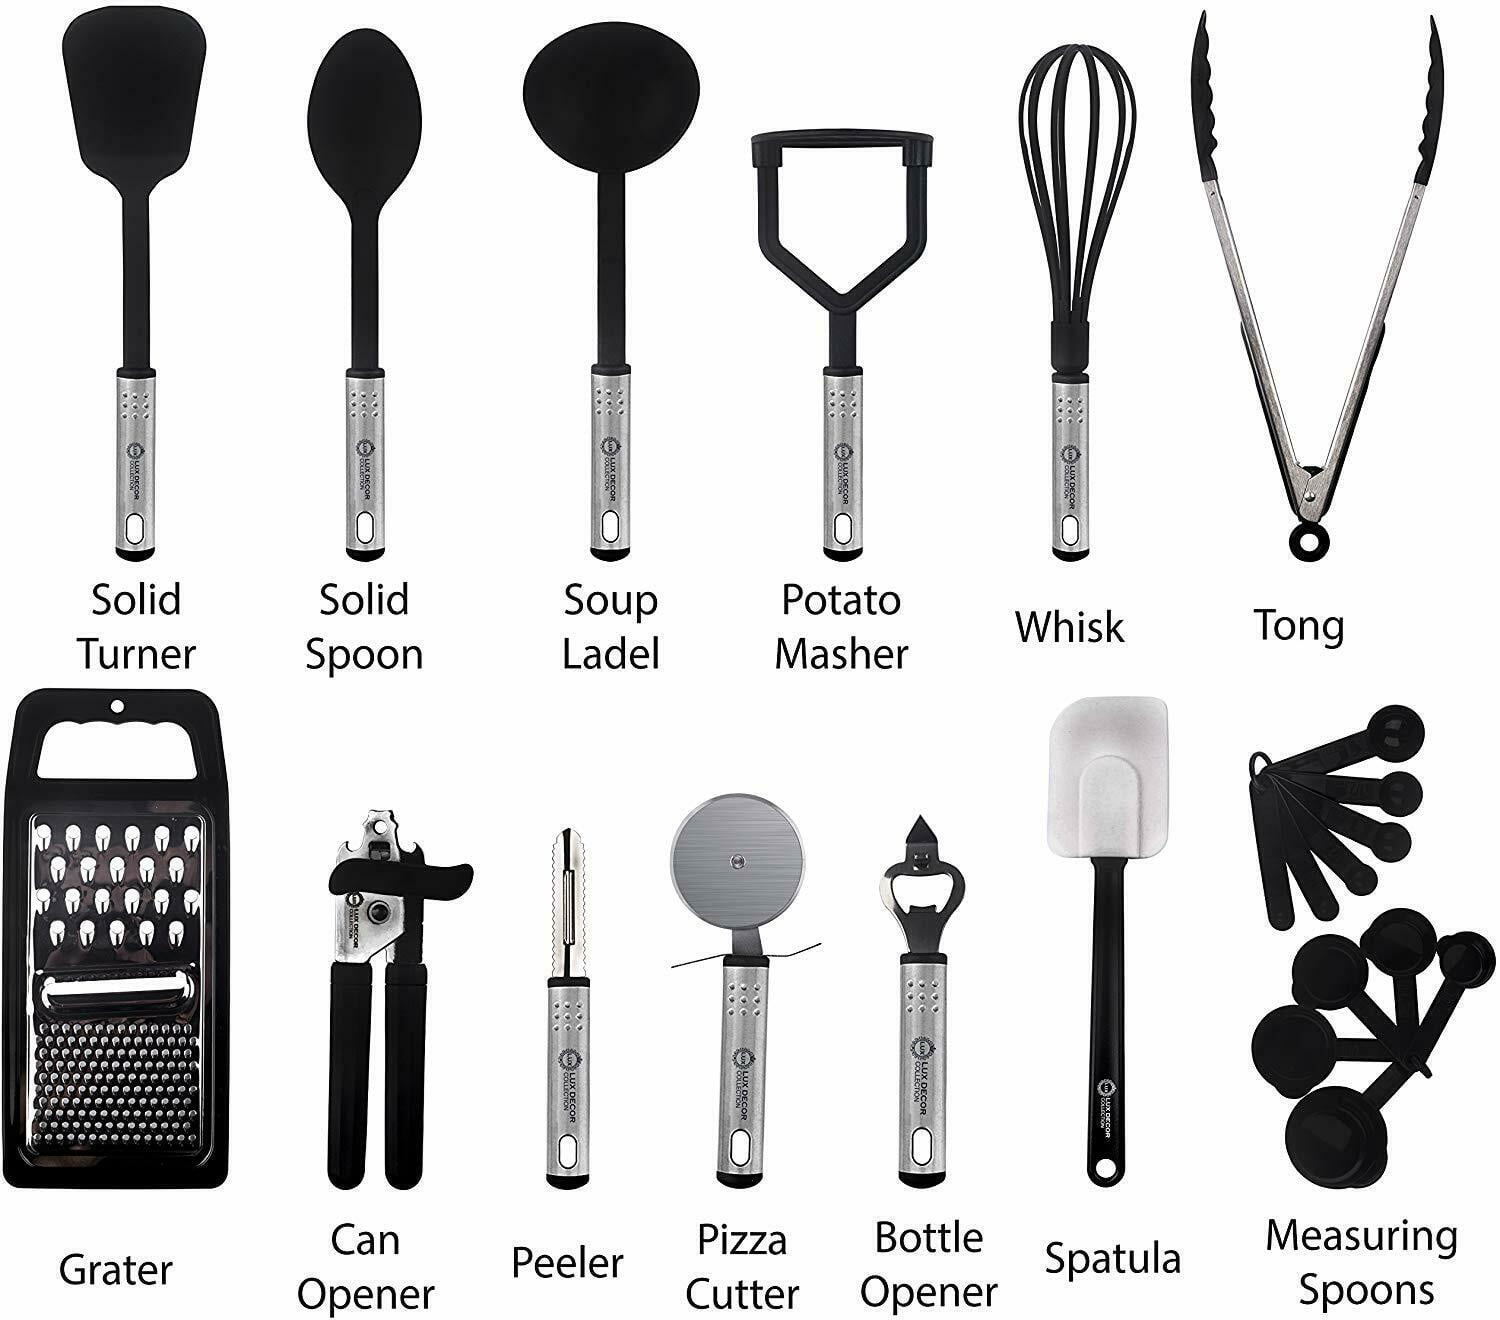 Amazing Facts about Kitchen Utensils - Urban Snackers